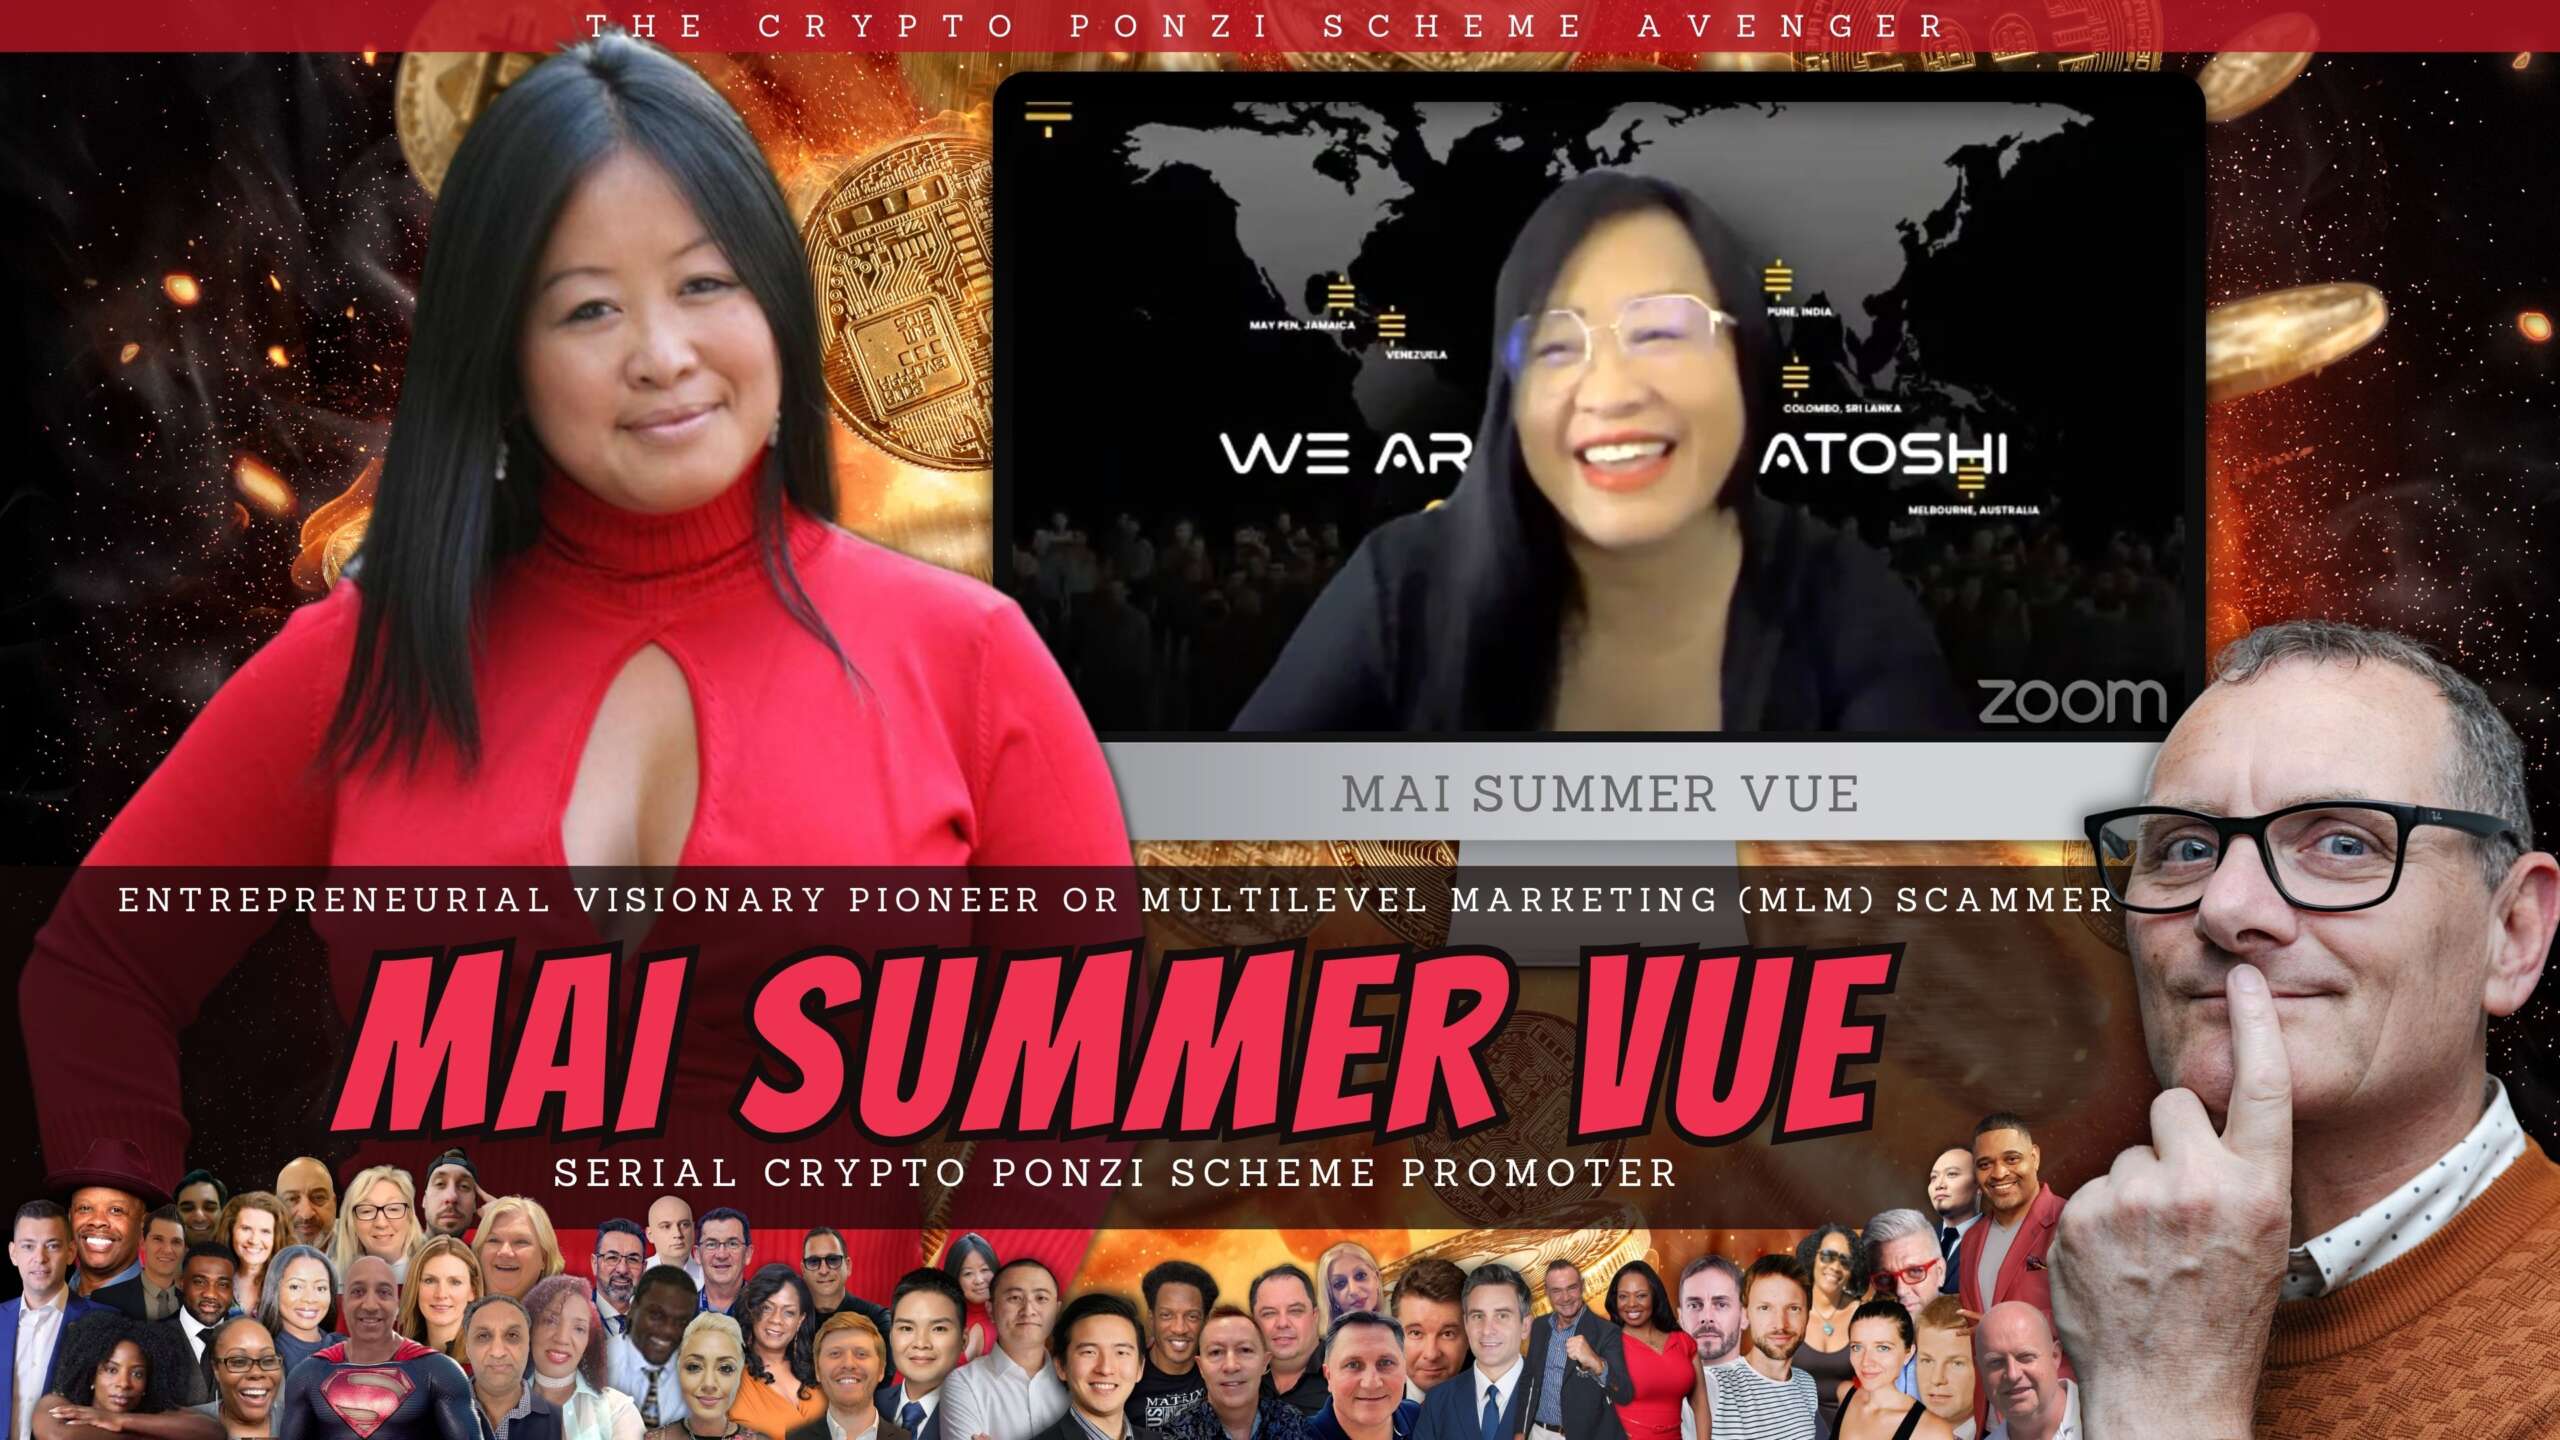 Ambiguous Mai Summer Vue "Entrepreneurial Visionary Pioneer" or "Multilevel Marketing (MLM) Scammer"